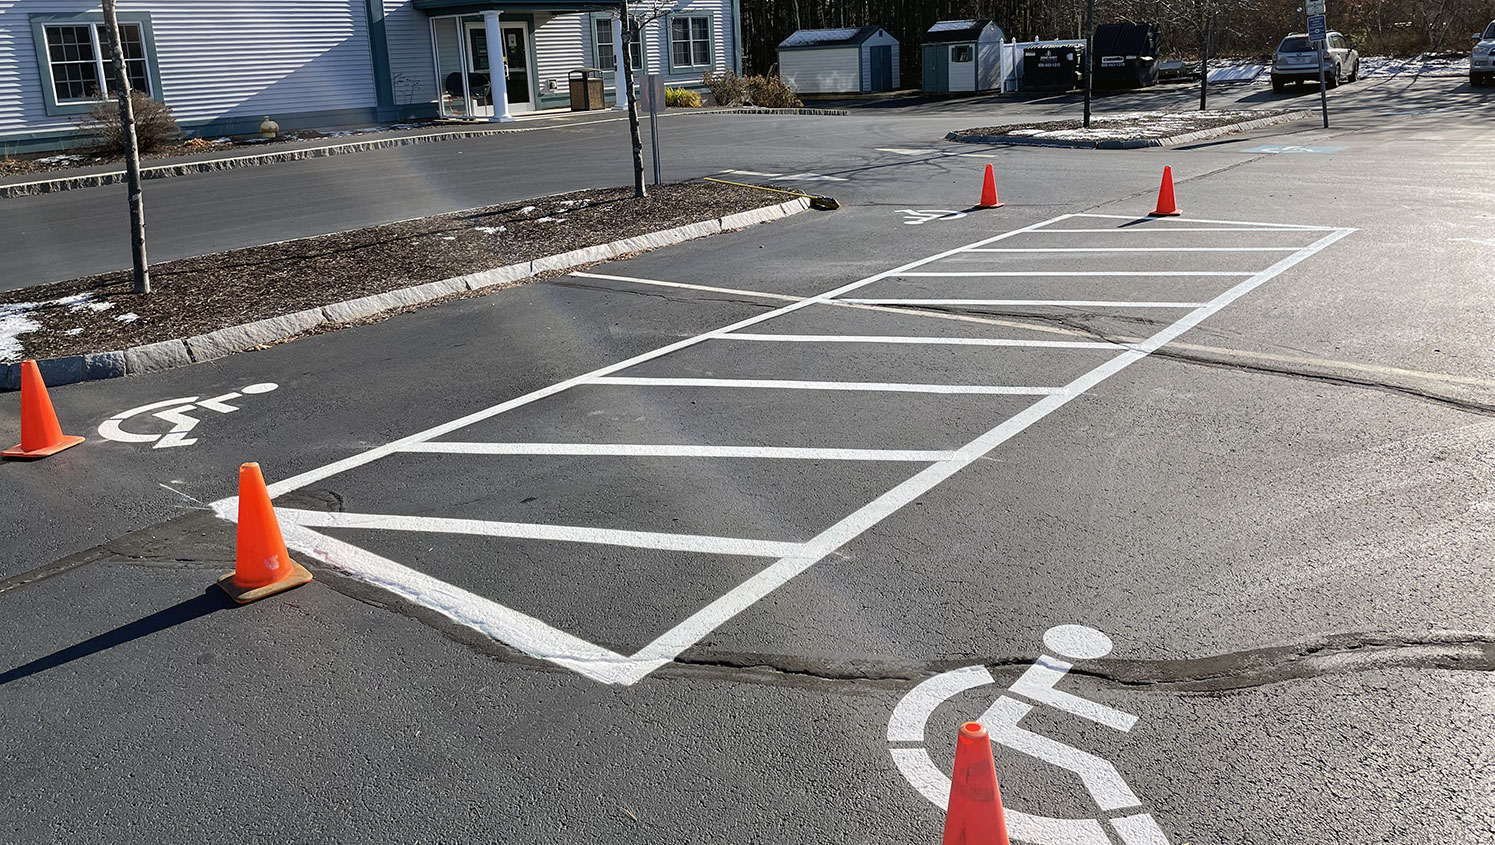 re-striped ADA accessible parking spaces